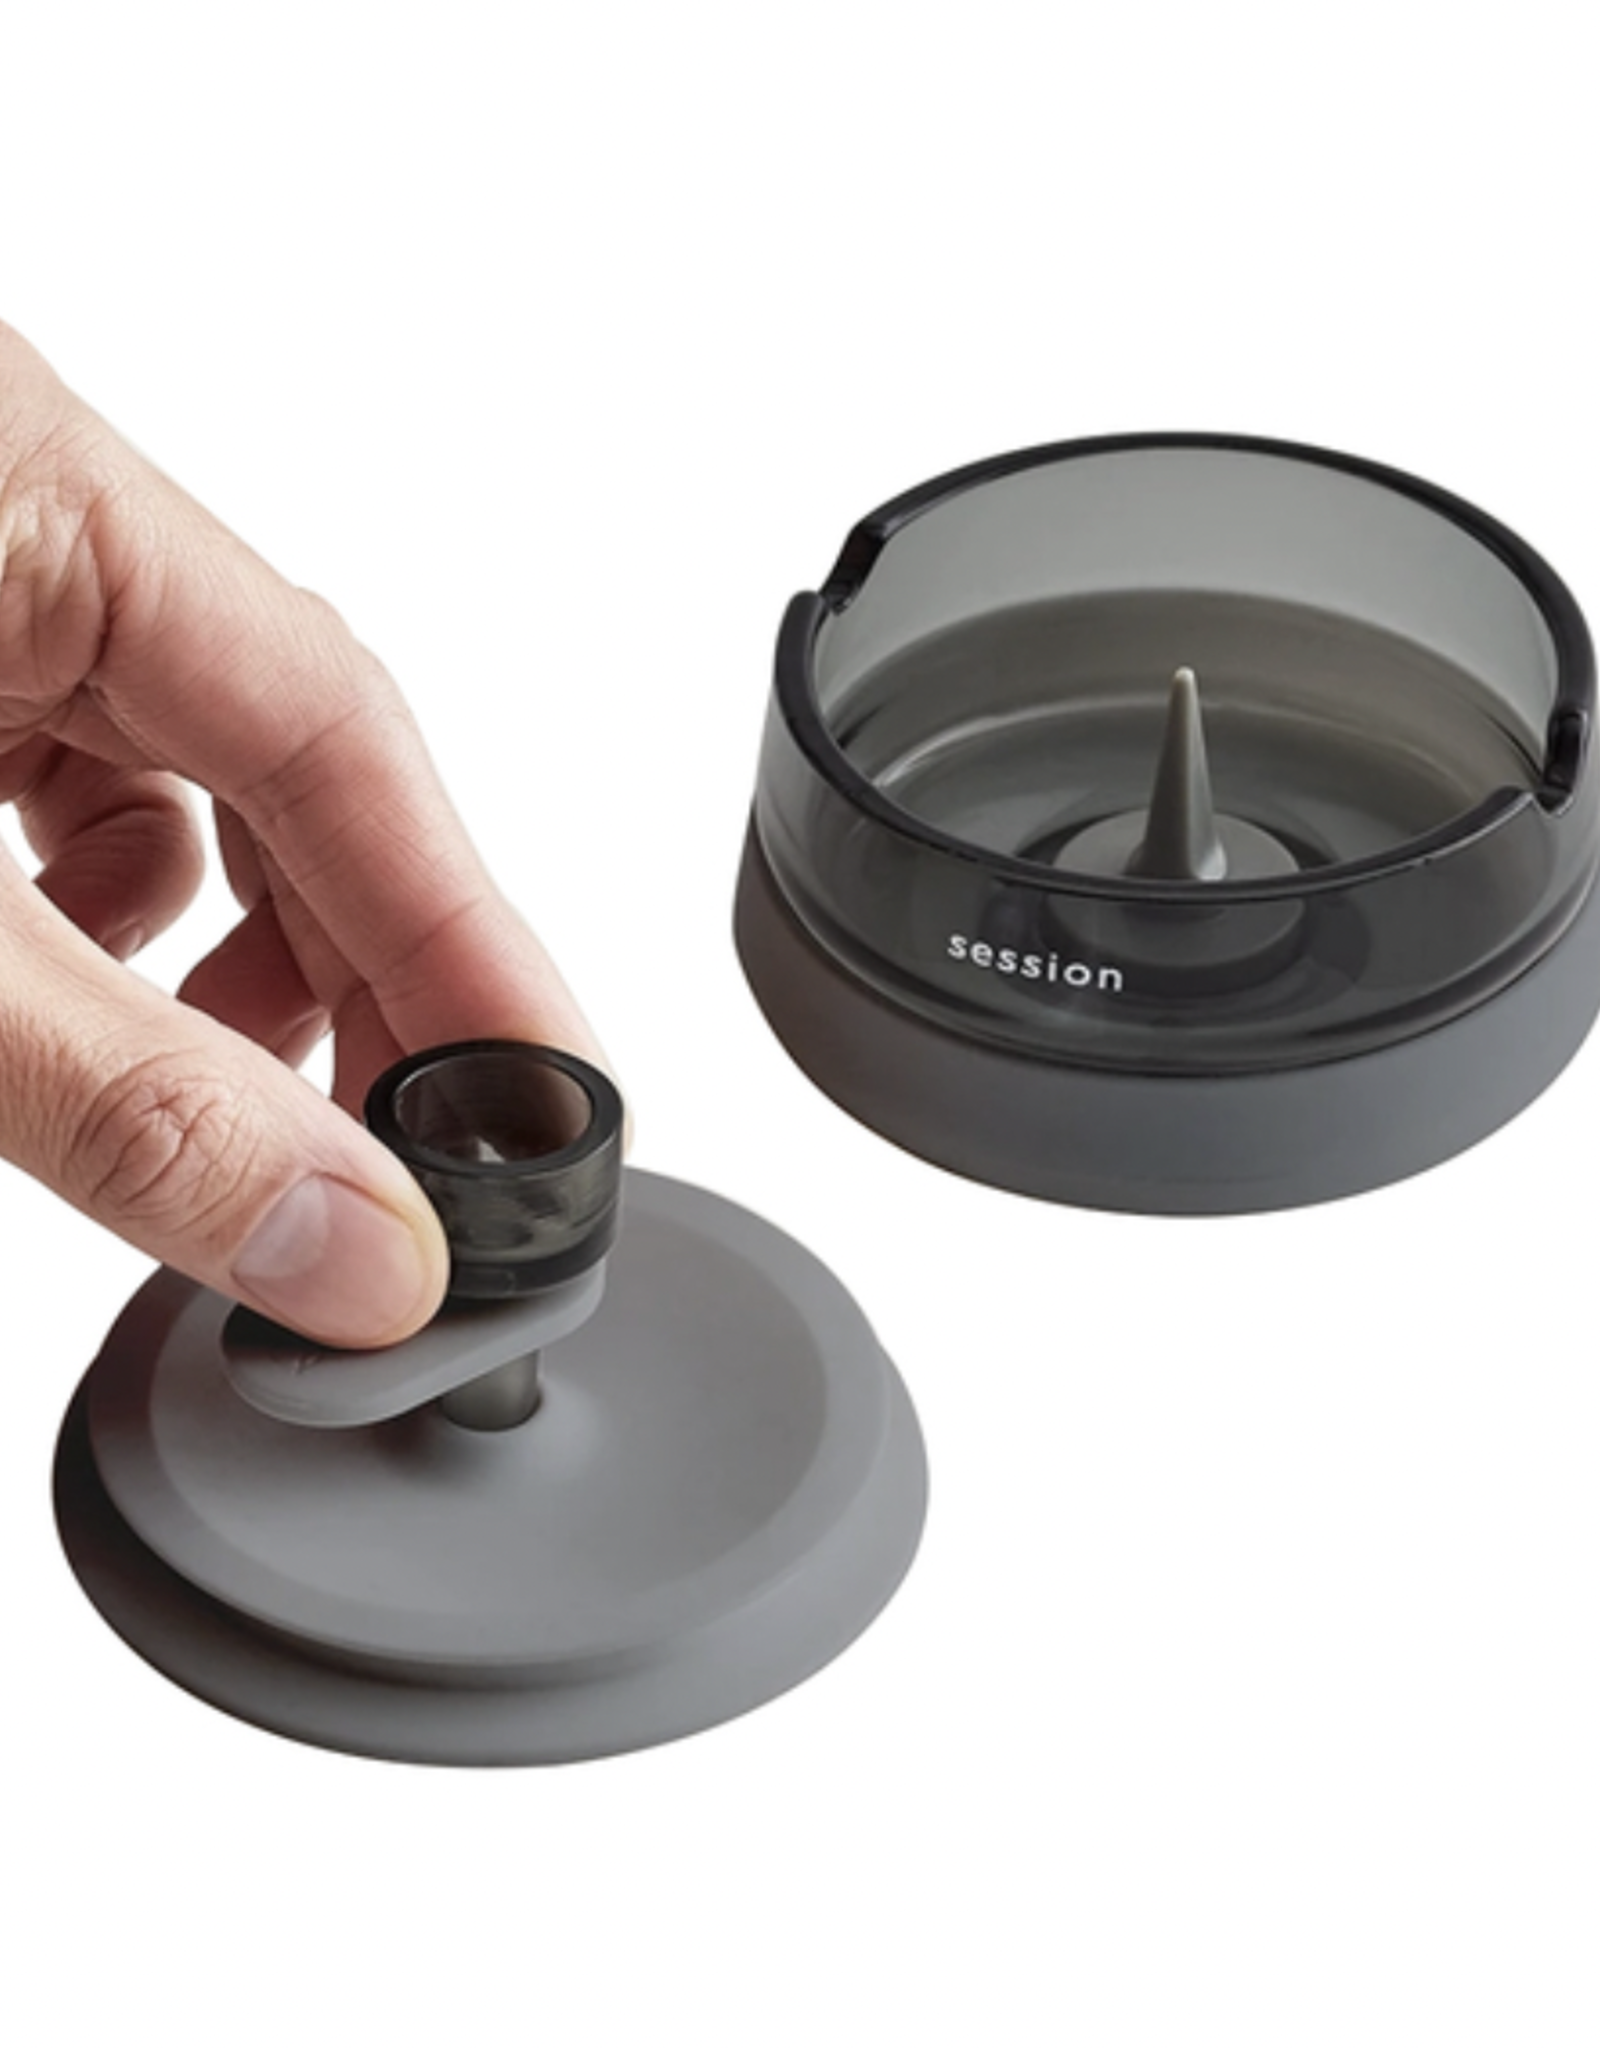 Session Goods Ashtray - Charcoal